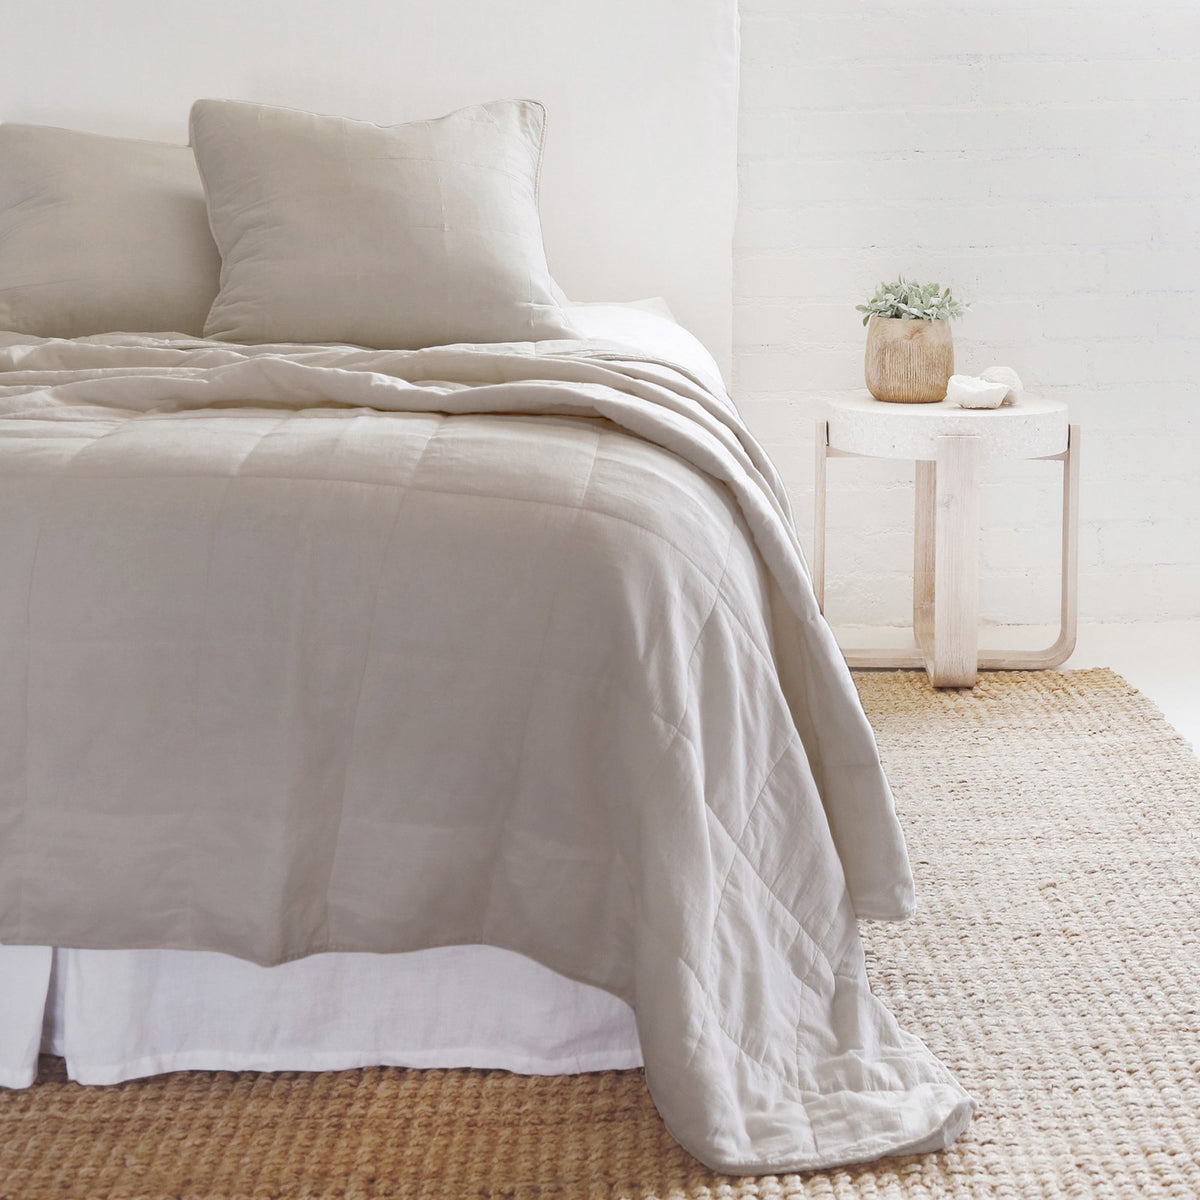 POM POM ANTWERP COVERLET COLLECTION - NATURAL